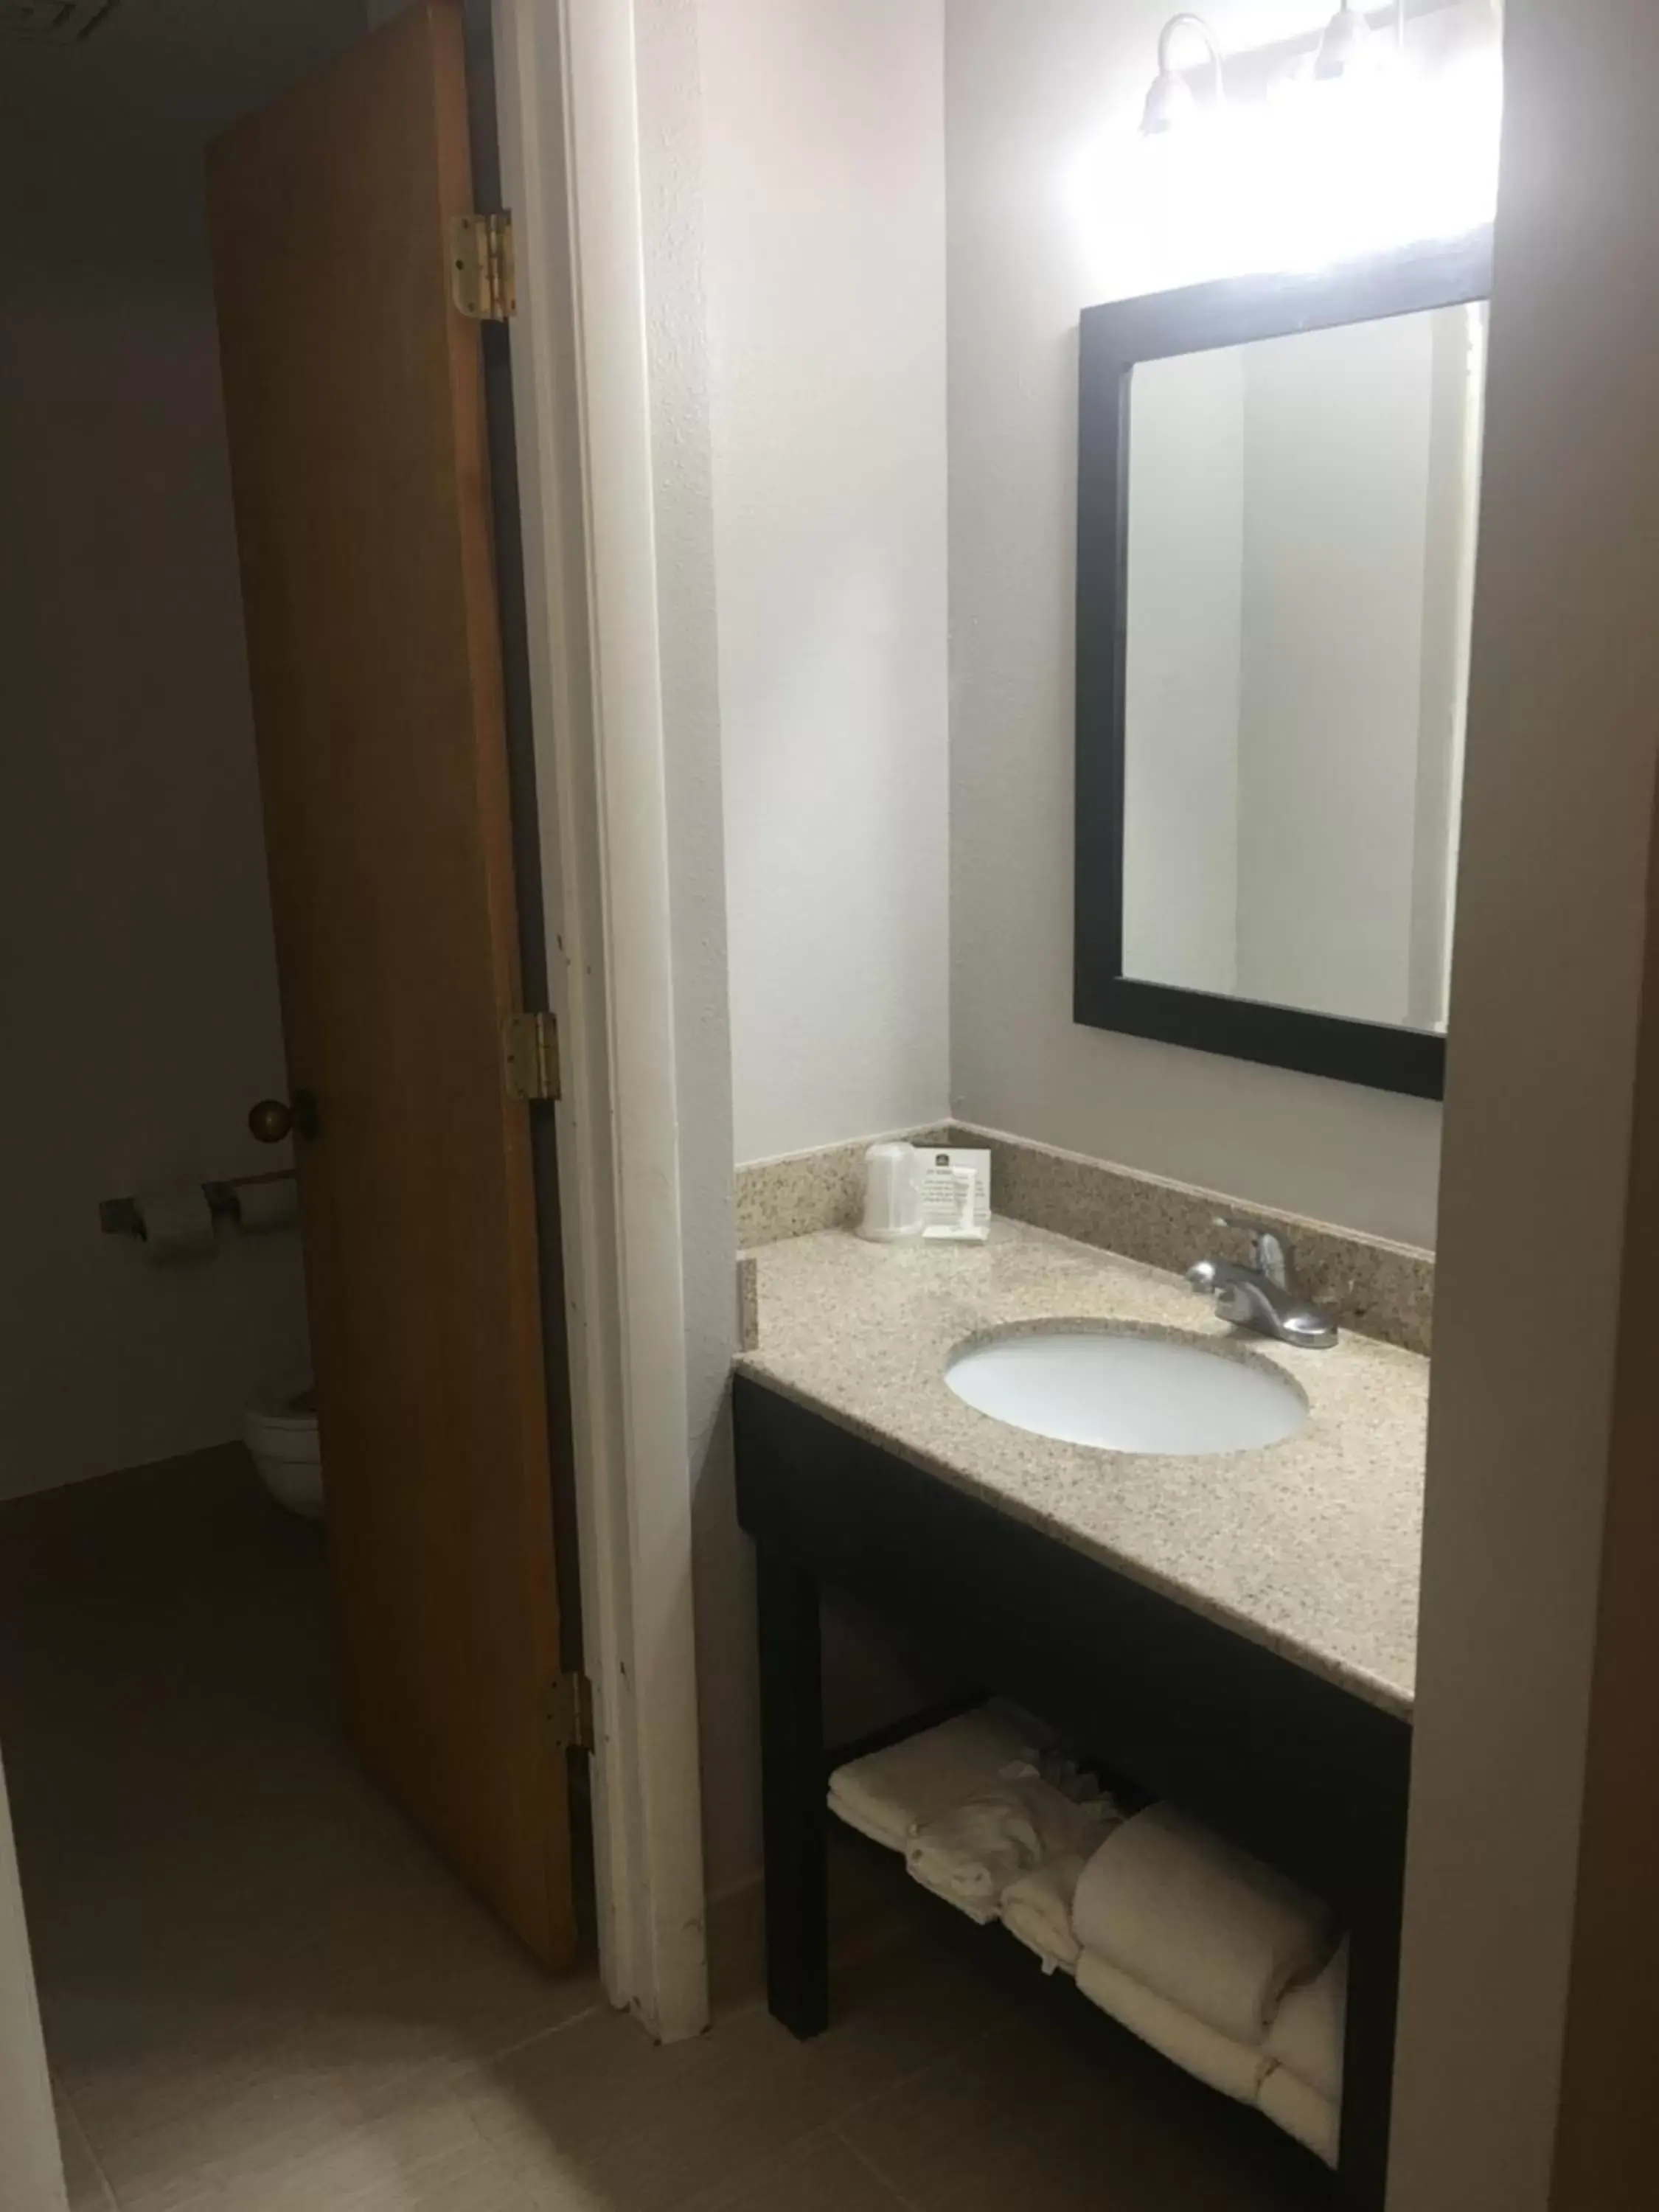 Bathroom in Country Inn & Suites by Radisson, Indianapolis East, IN